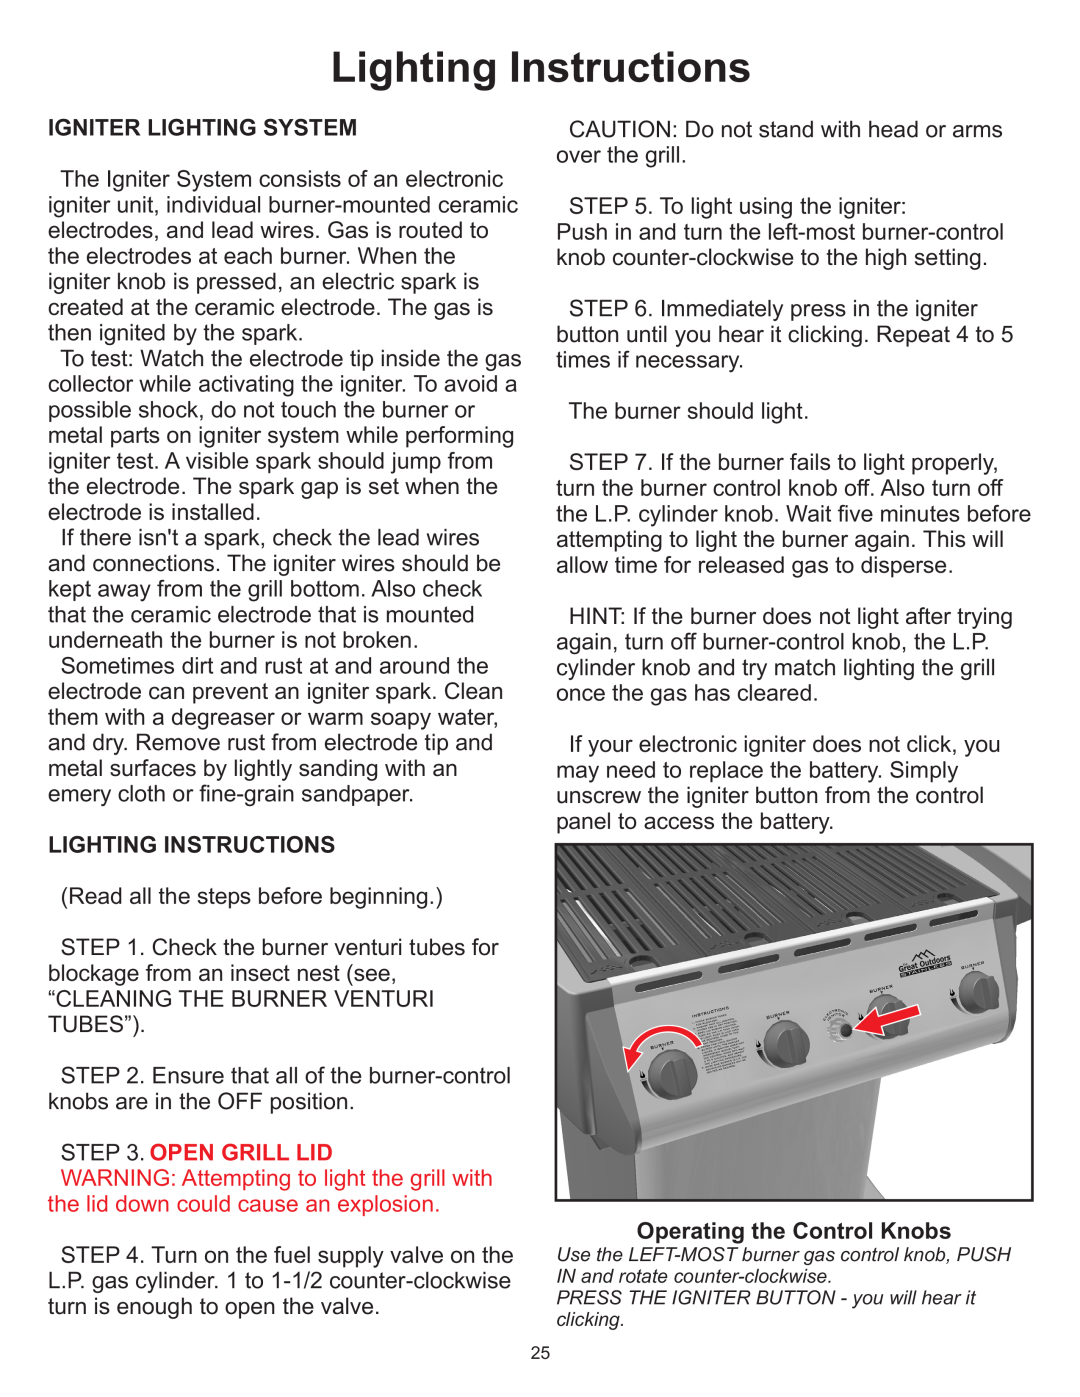 Vermont Casting Gas Grill Lighting Instructions, Igniter Lighting System, Open Grill Lid, Operating the Control Knobs 